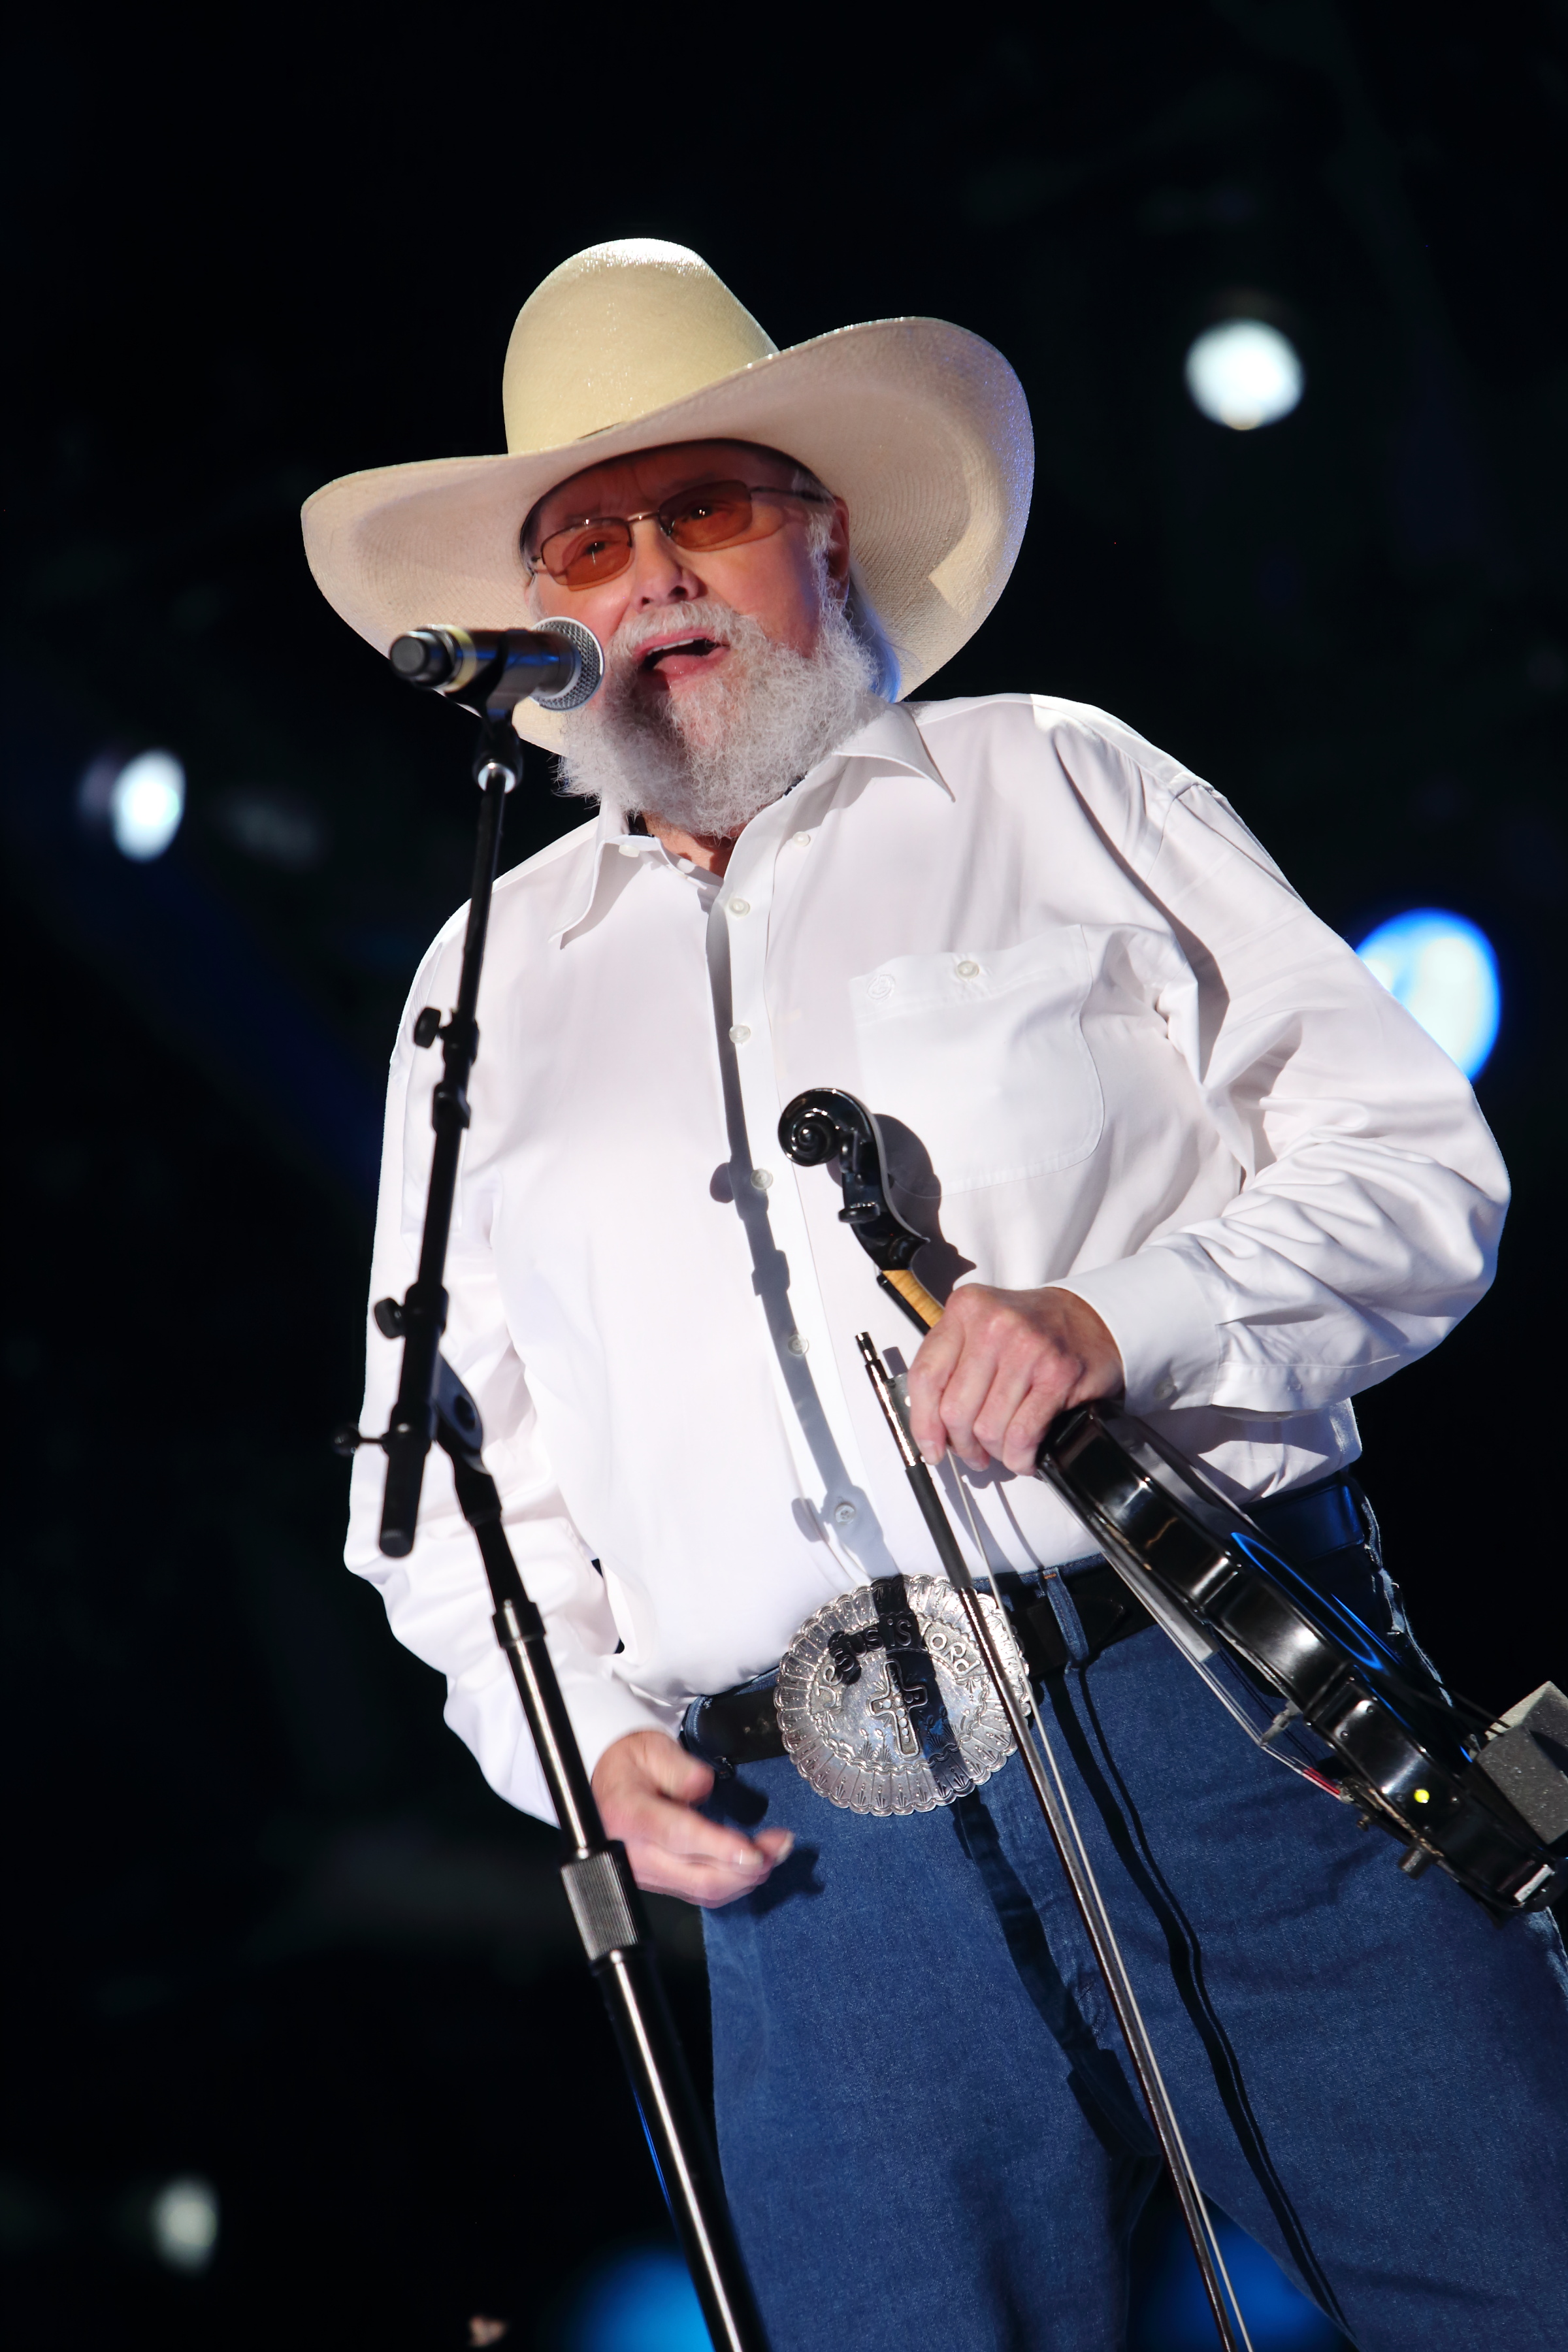 After long history with Confederate flag, country music quietly